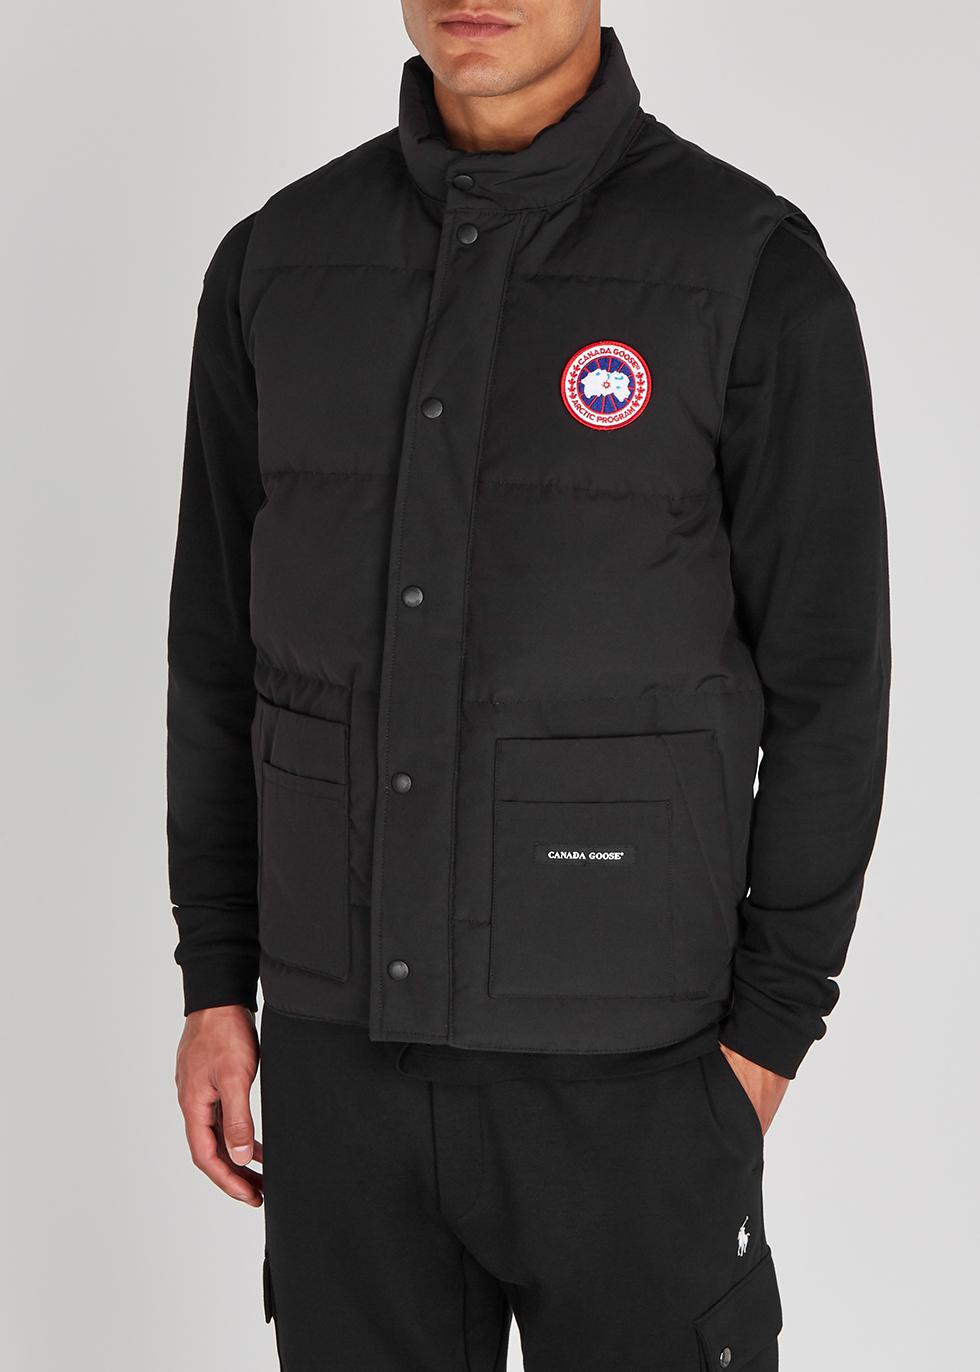 Canada Goose Cotton Garson Quilted Gilet in Black for Men - Save 37% - Lyst